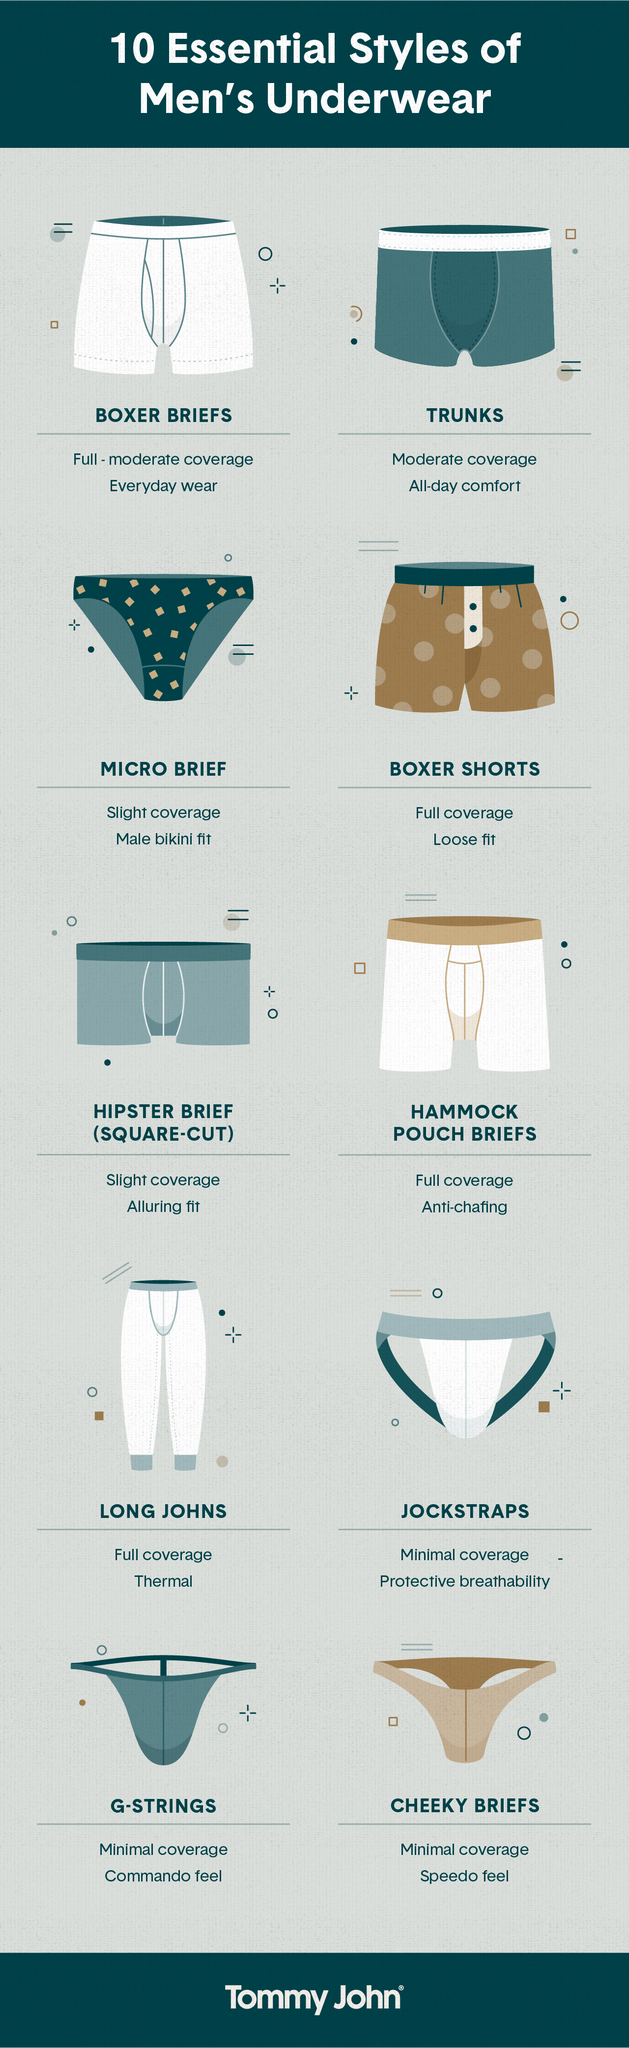 What's the difference between men's briefs and men's bikini briefs